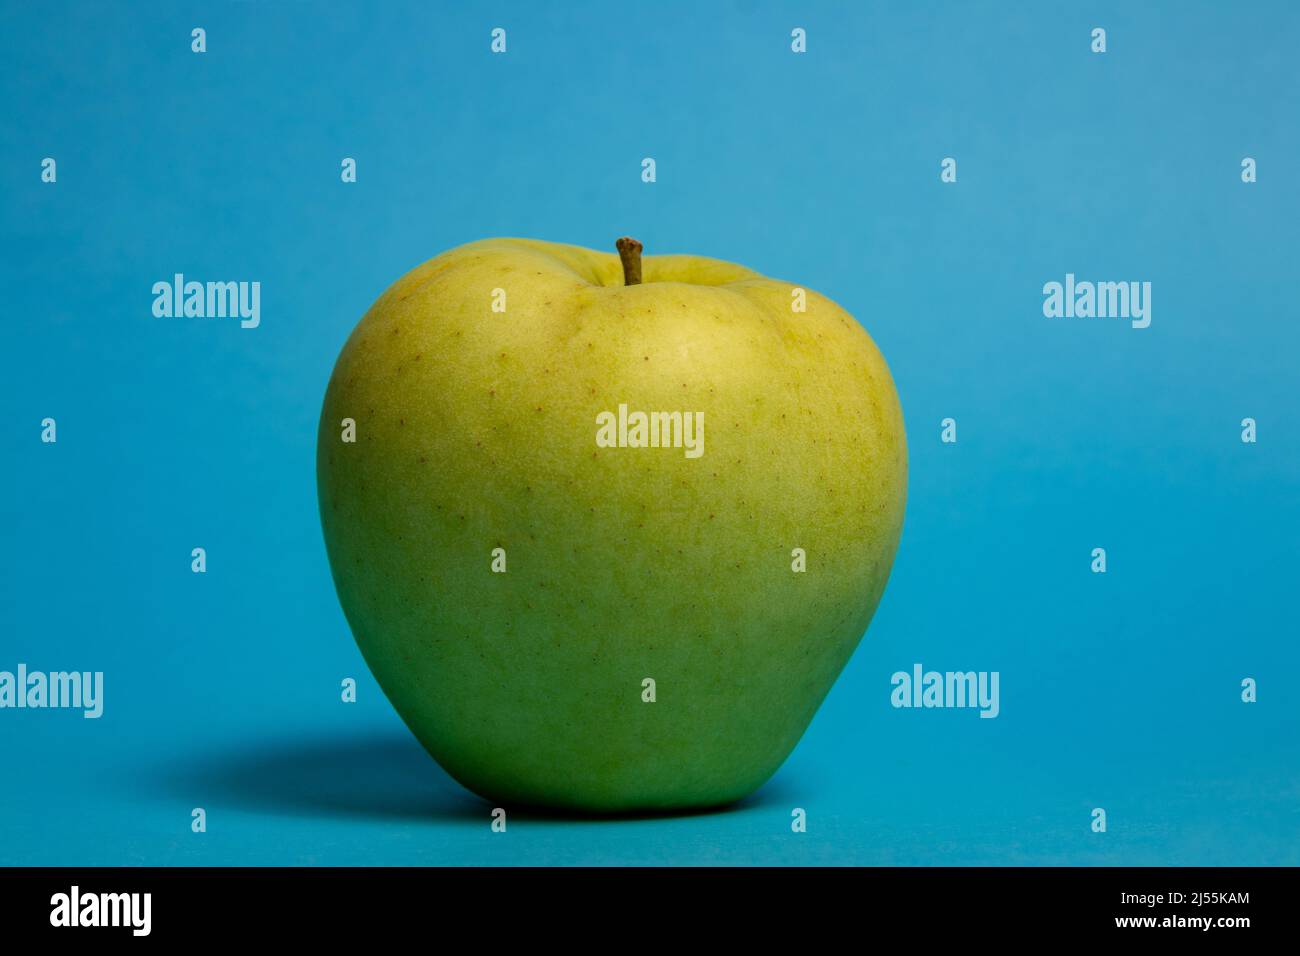 Big green apple over blue background. Golden Delicious apple Stock Photo